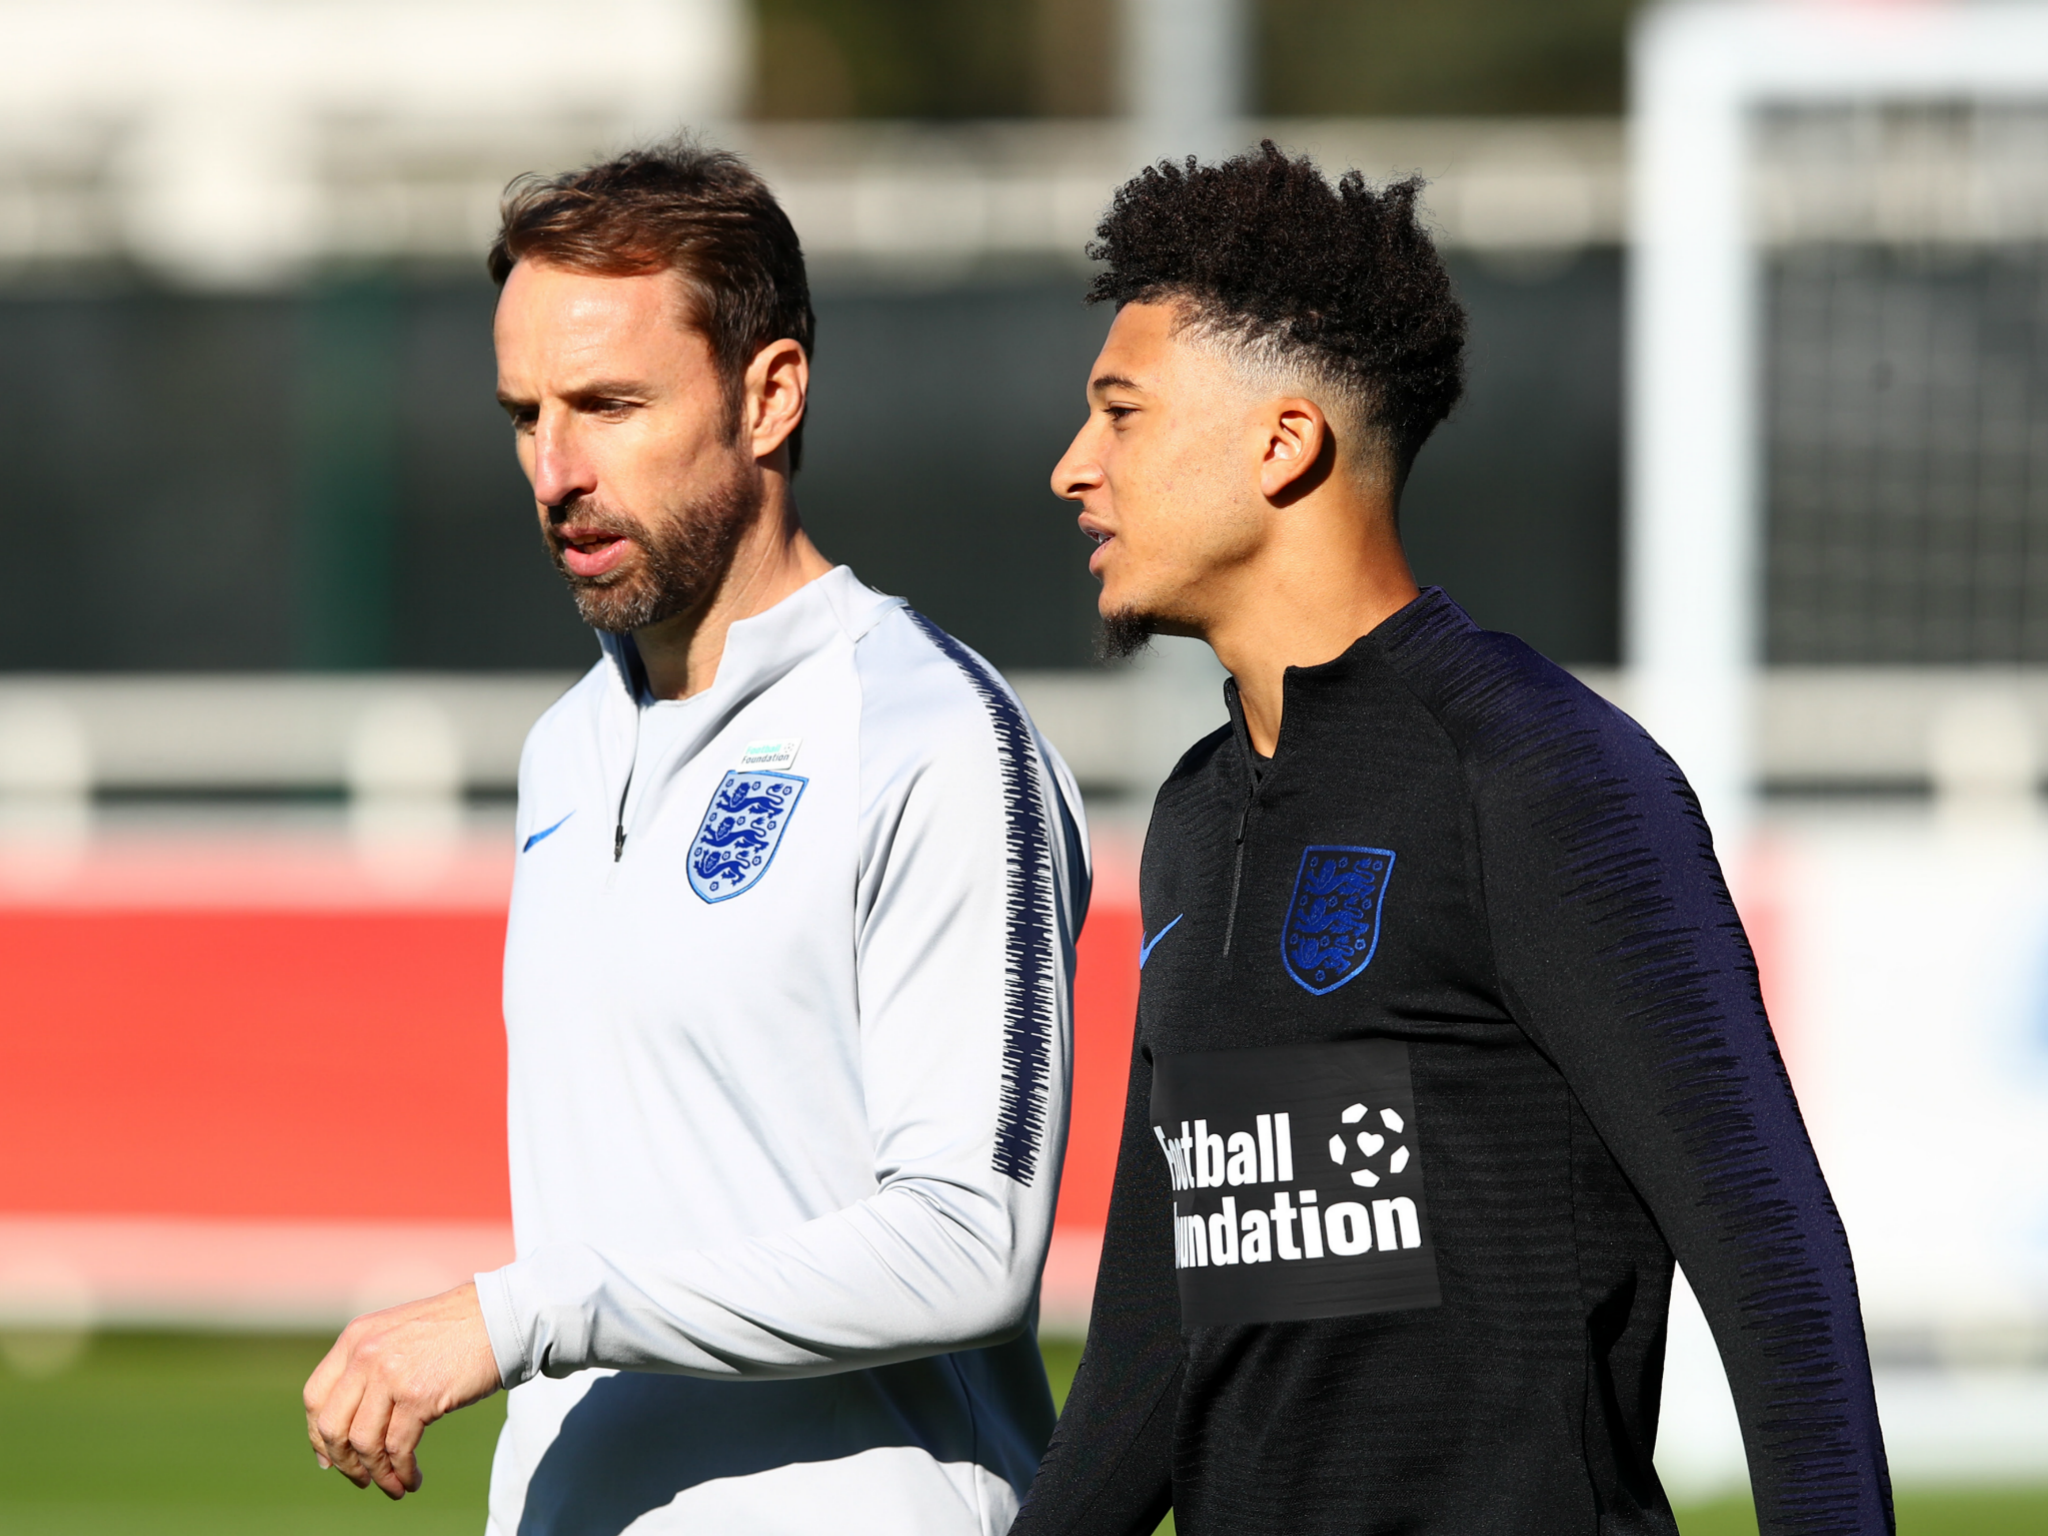 Southgate has named six uncapped players in his latest squad